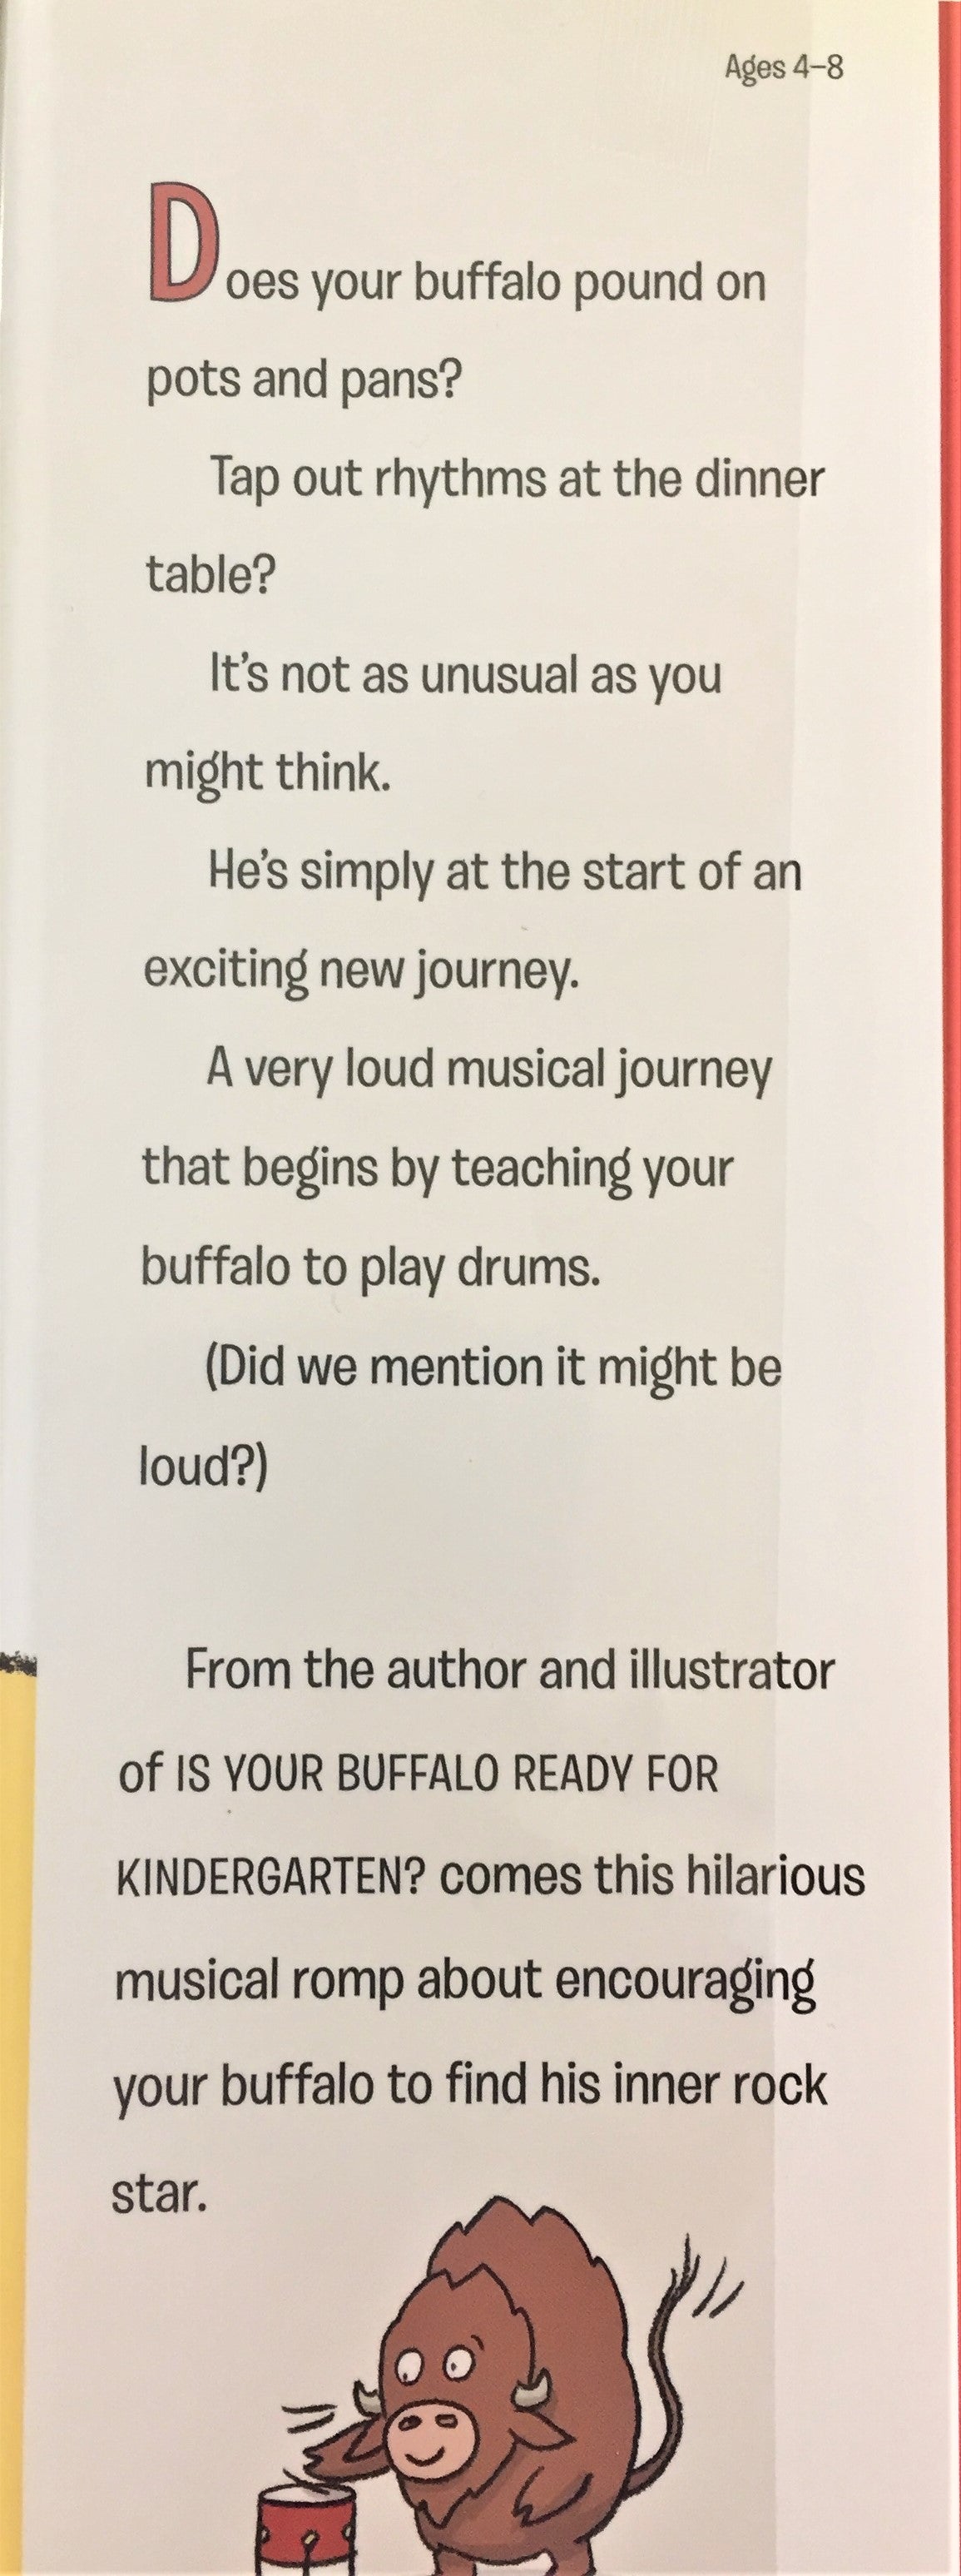 BOOKS - Teach Your Buffalo to Play Drums